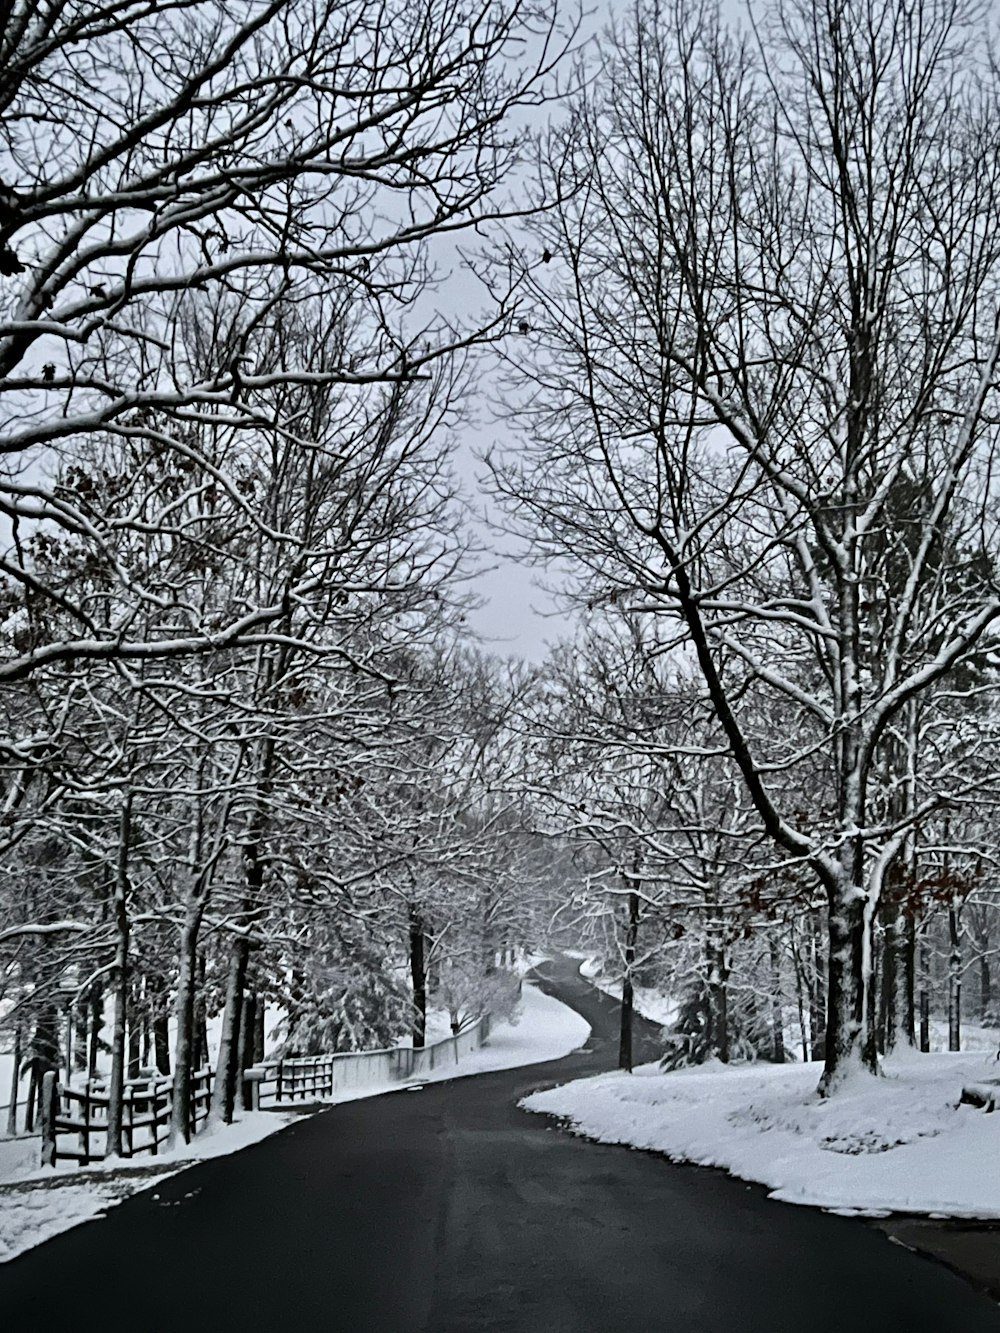 a snowy road with trees and a bridge in the distance